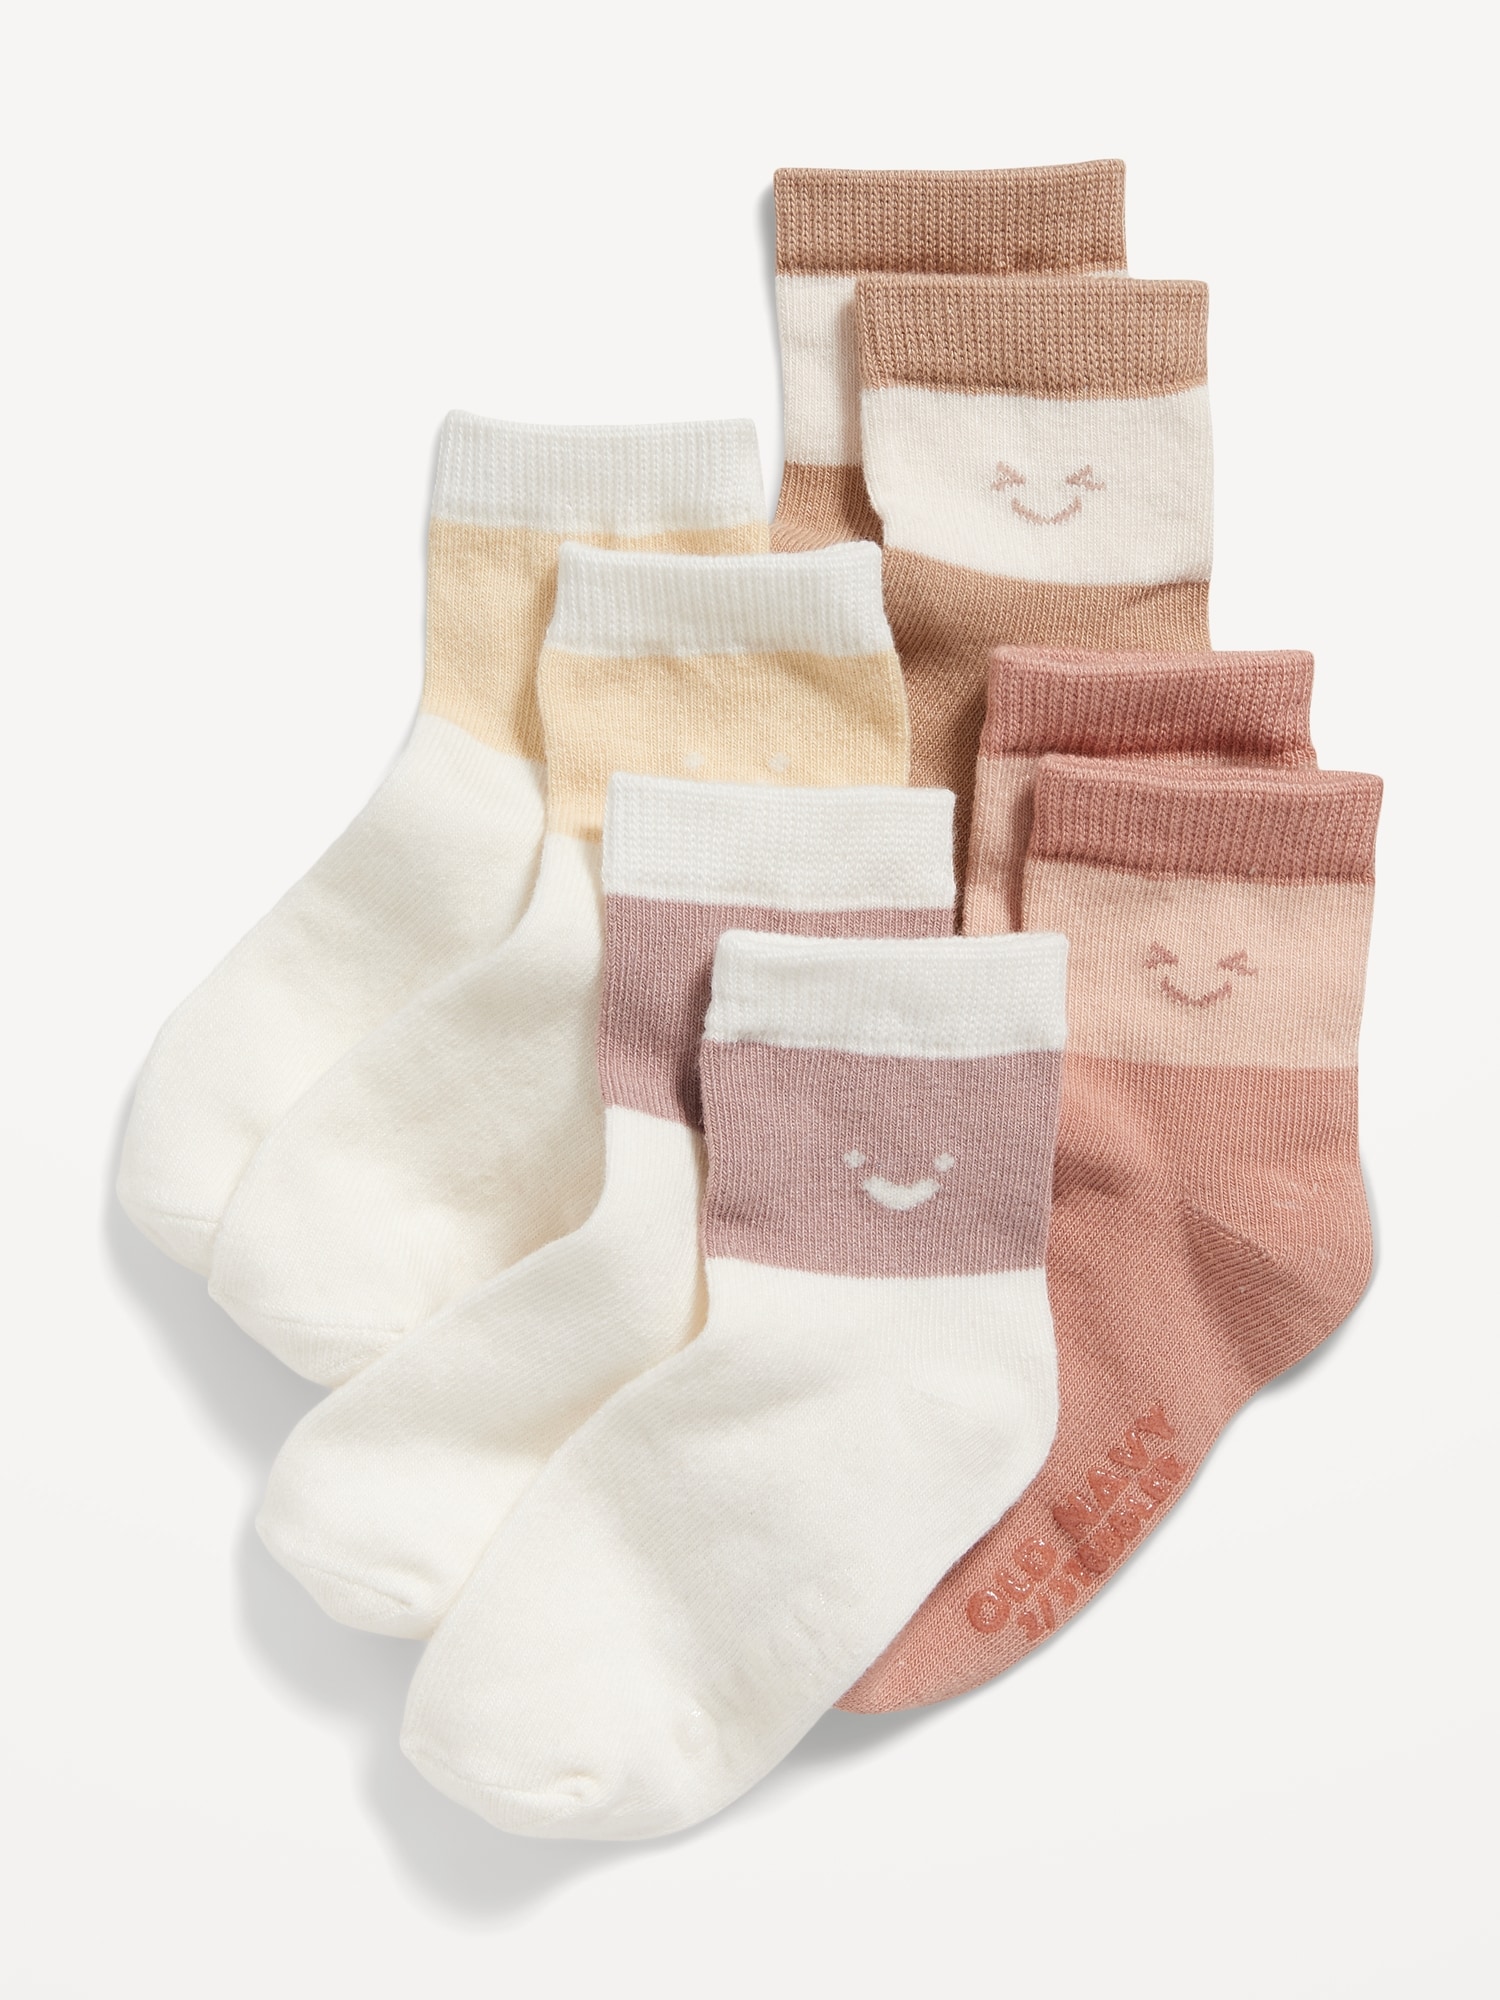 Unisex Crew "Happy Faces" Socks 4-Pack for Toddler & Baby